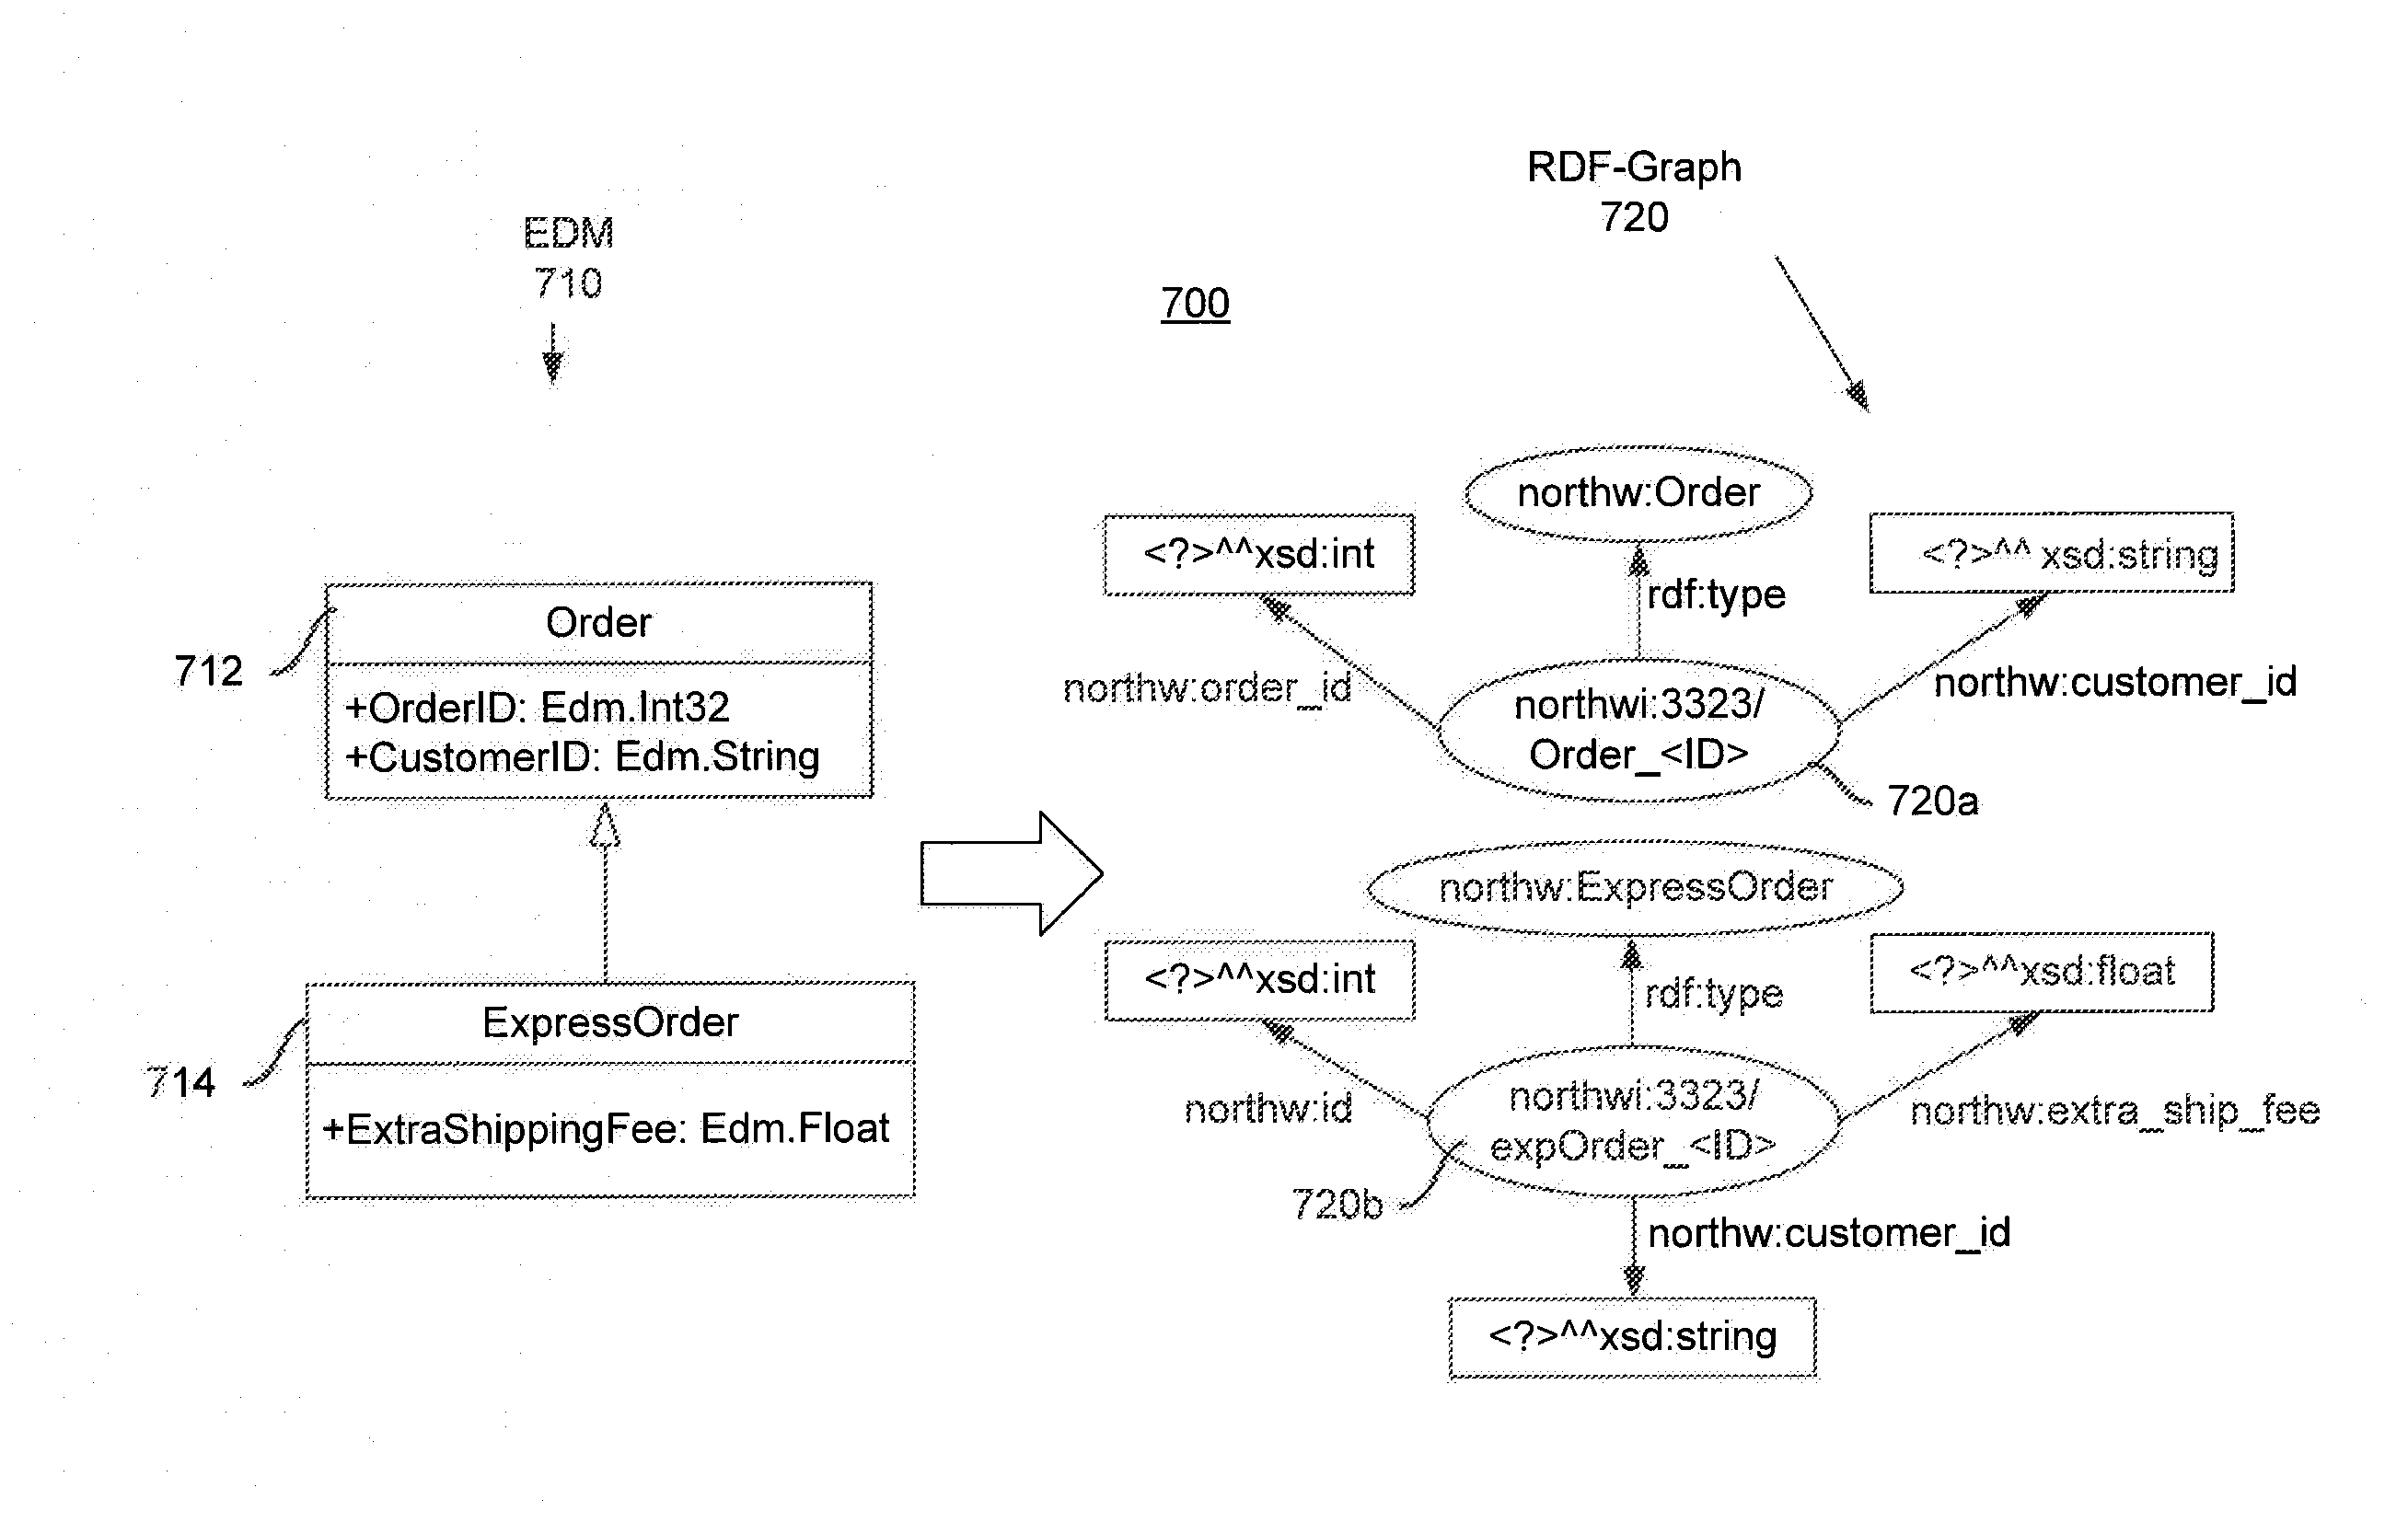 Semantic Mapping of Data From An Entity-Relationship Model to a Graph-Based Data Format to Facilitate Simplified Querying